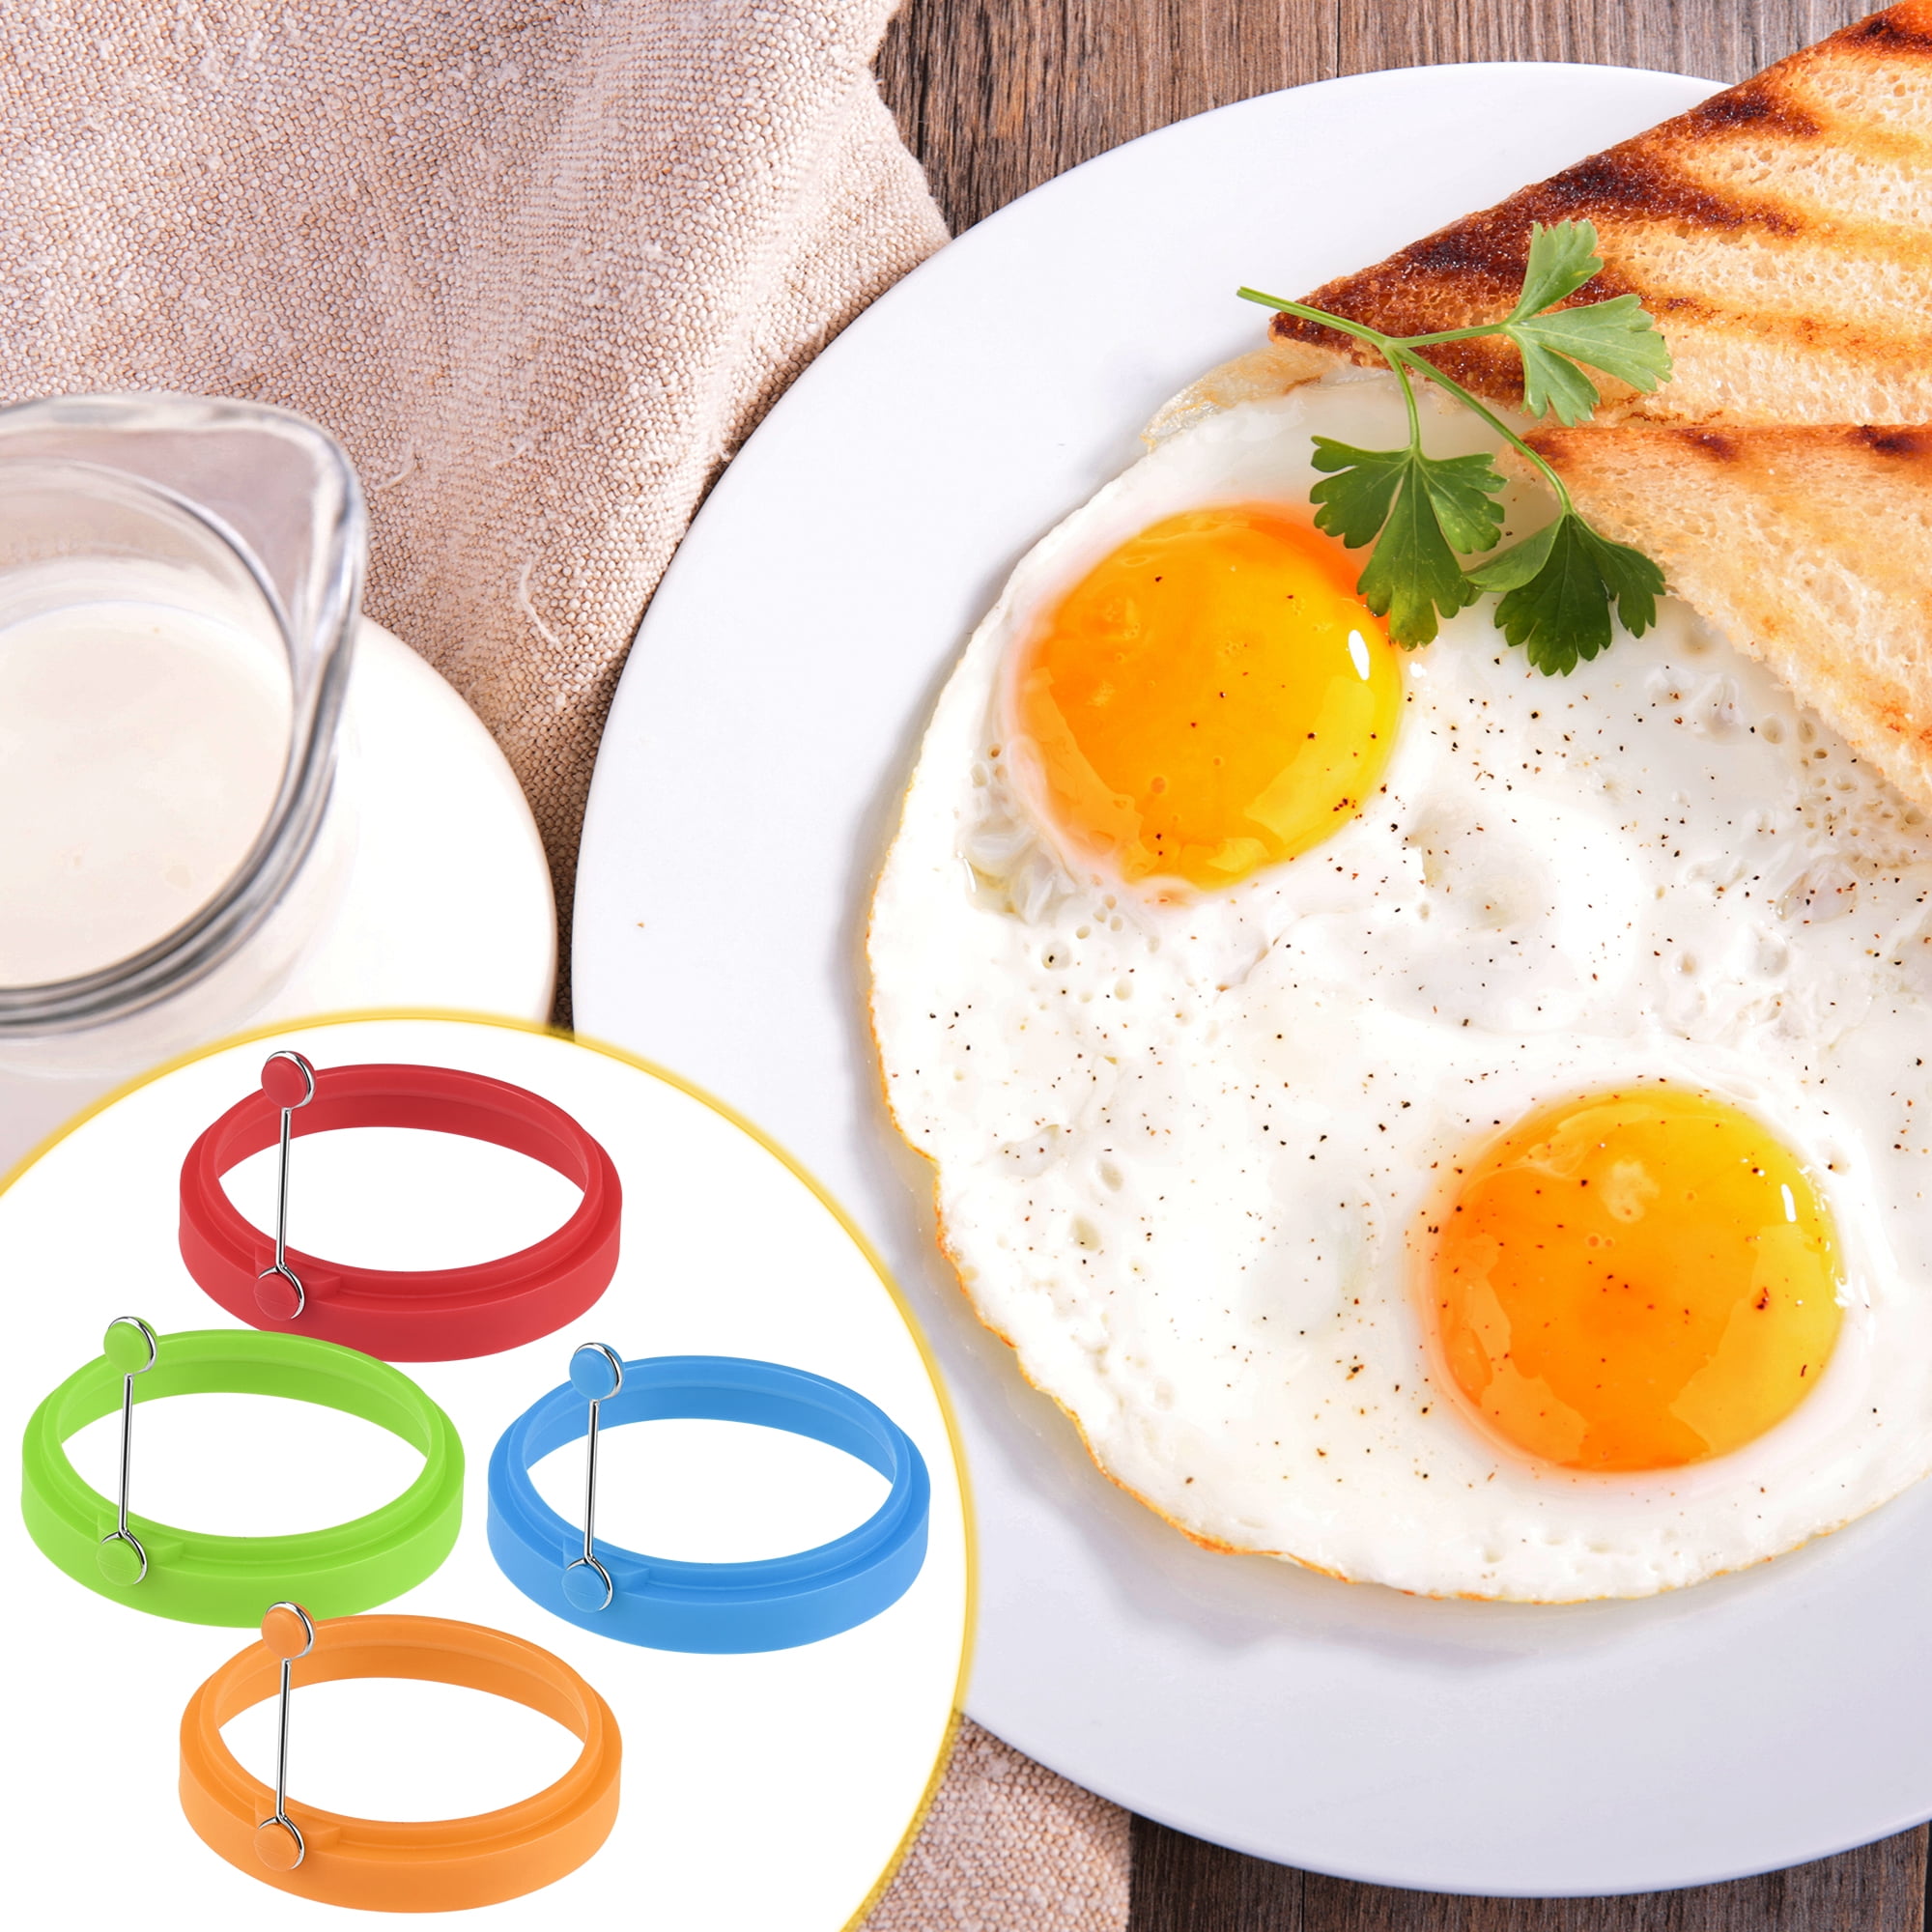 Nafxzy Egg Ring, 4 Pack Stainless Steel Egg Ring with Non Stick Metal Shaper Circles for Fried Egg McMuffin Sandwiches, Egg Maker, Set of 4